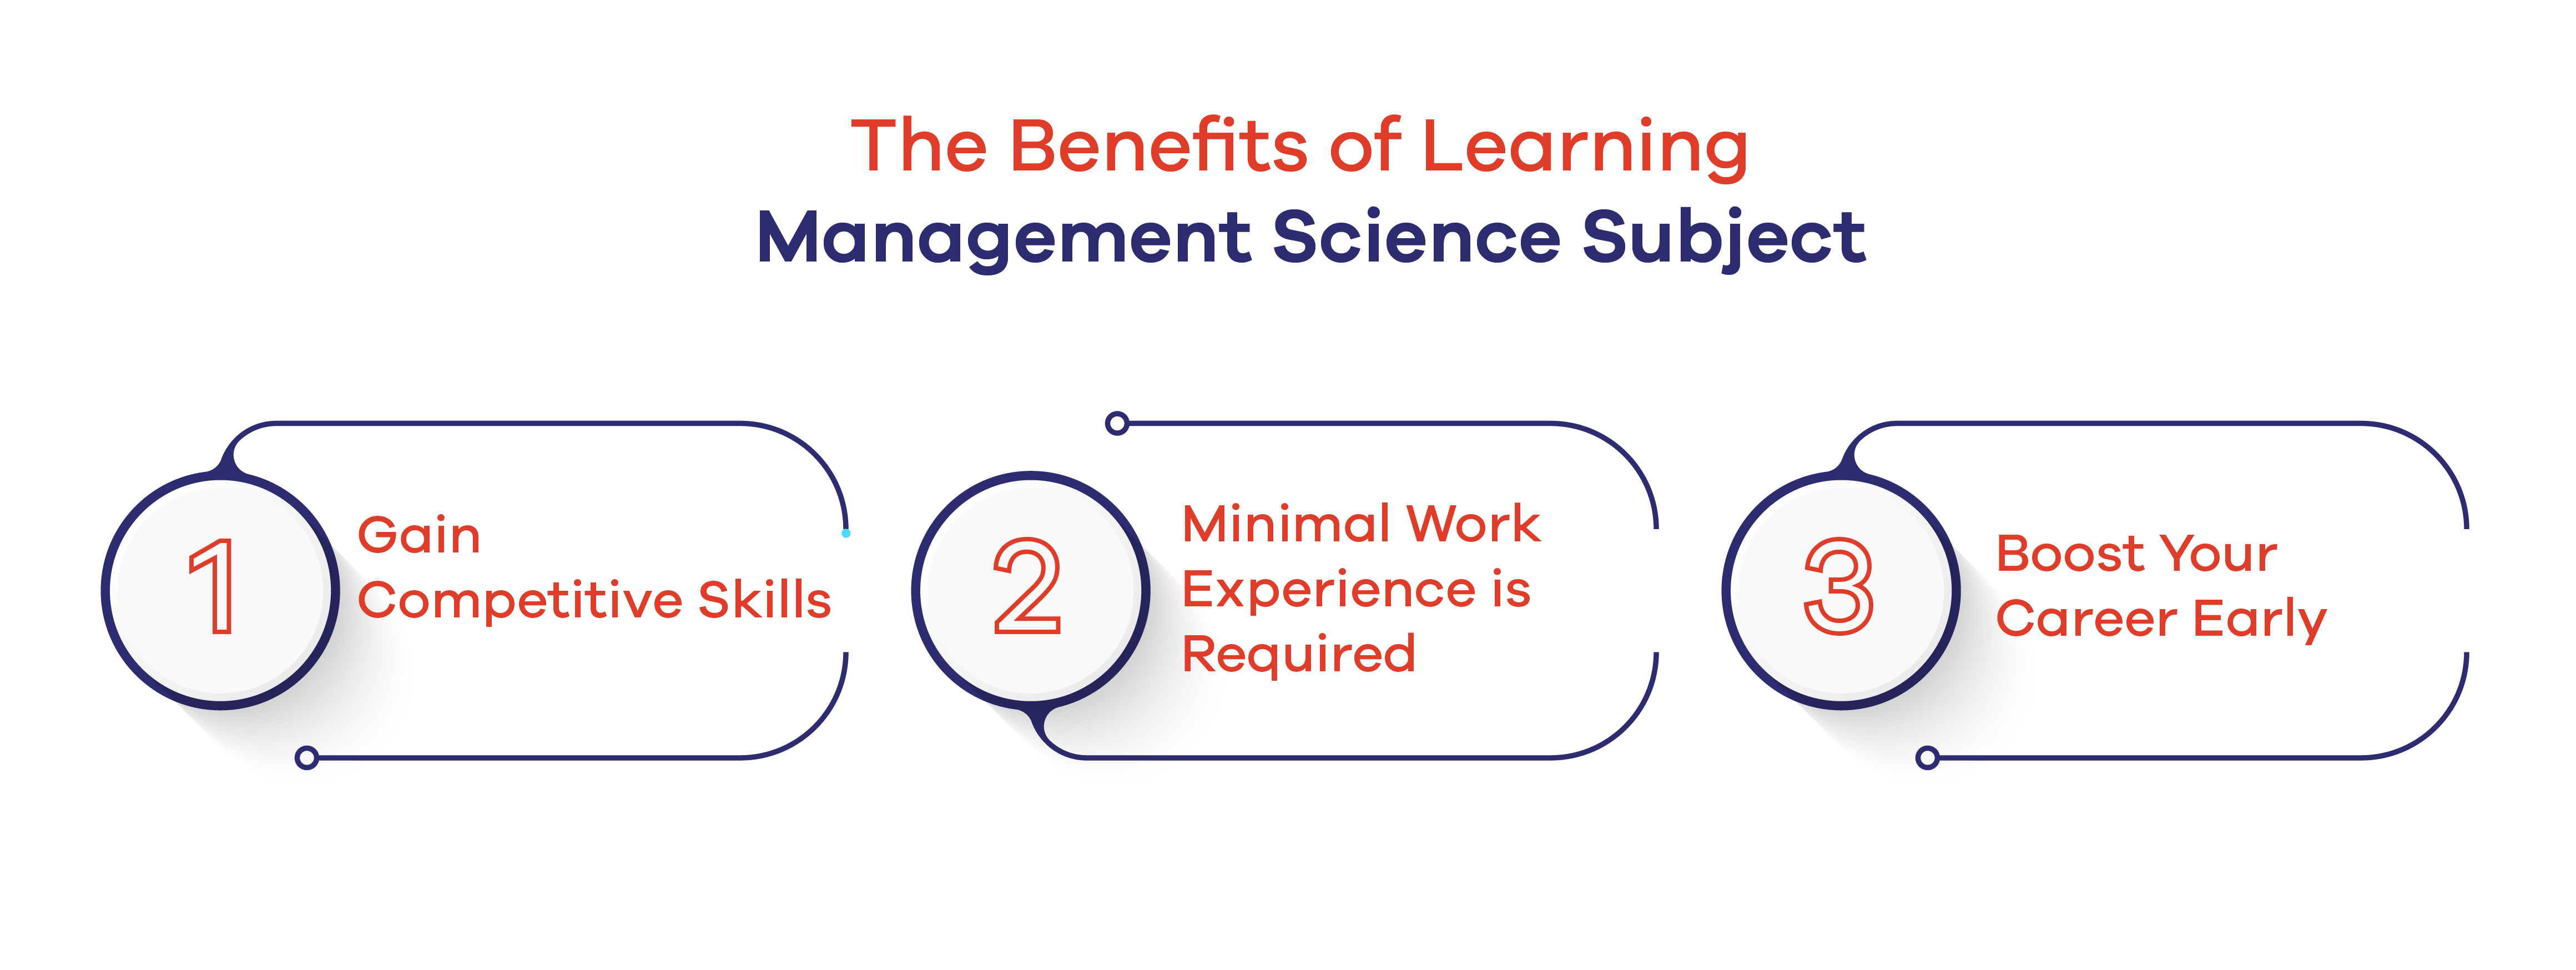 The Benefits of Learning Management Science Subject 